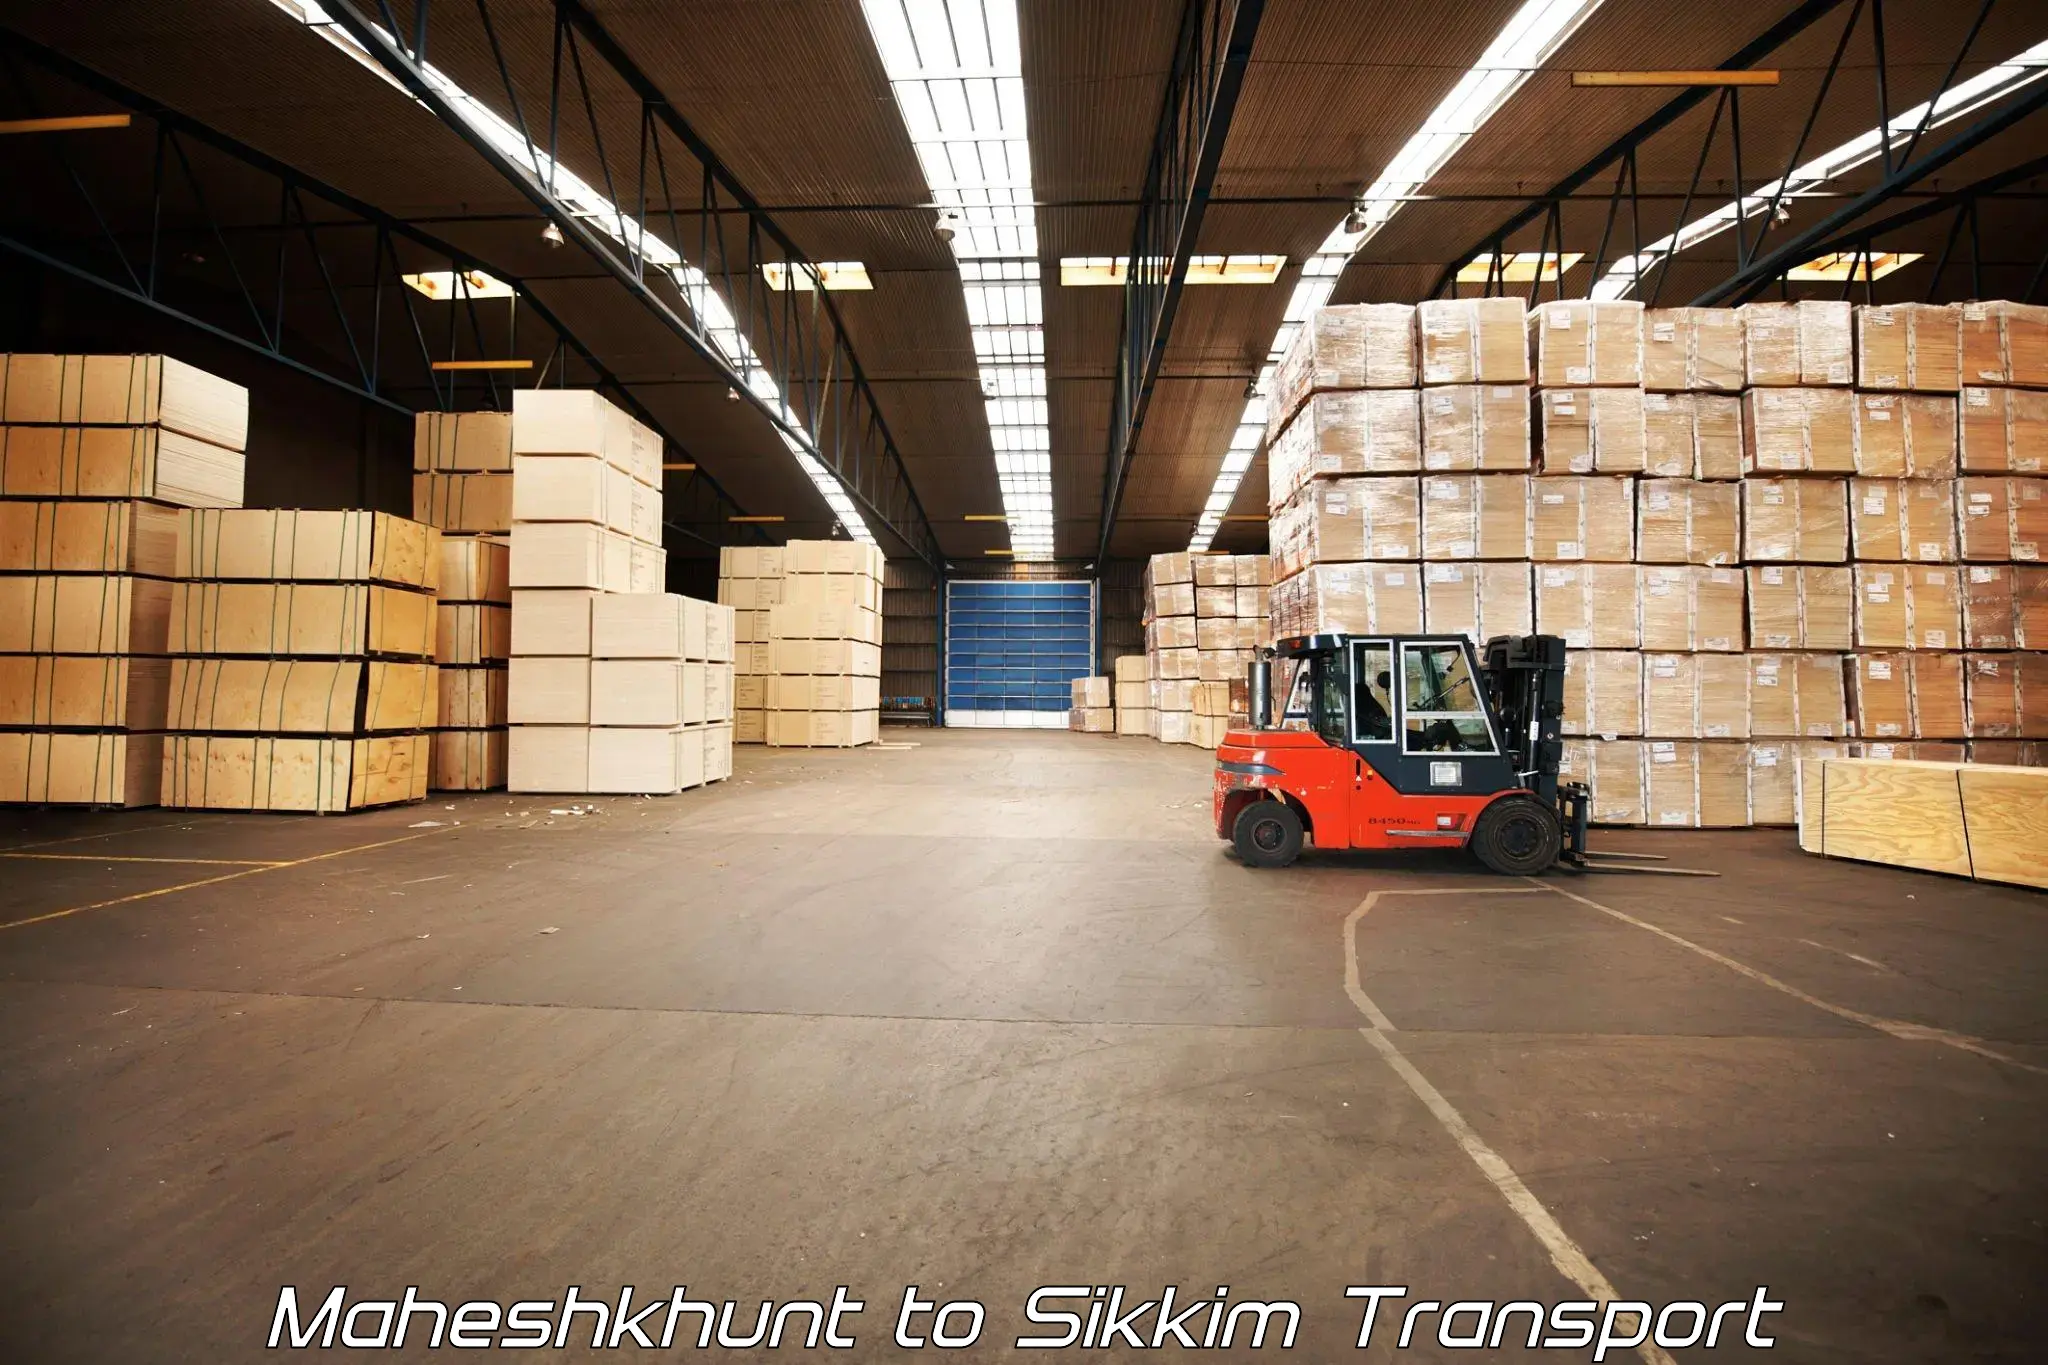 Truck transport companies in India Maheshkhunt to Pelling